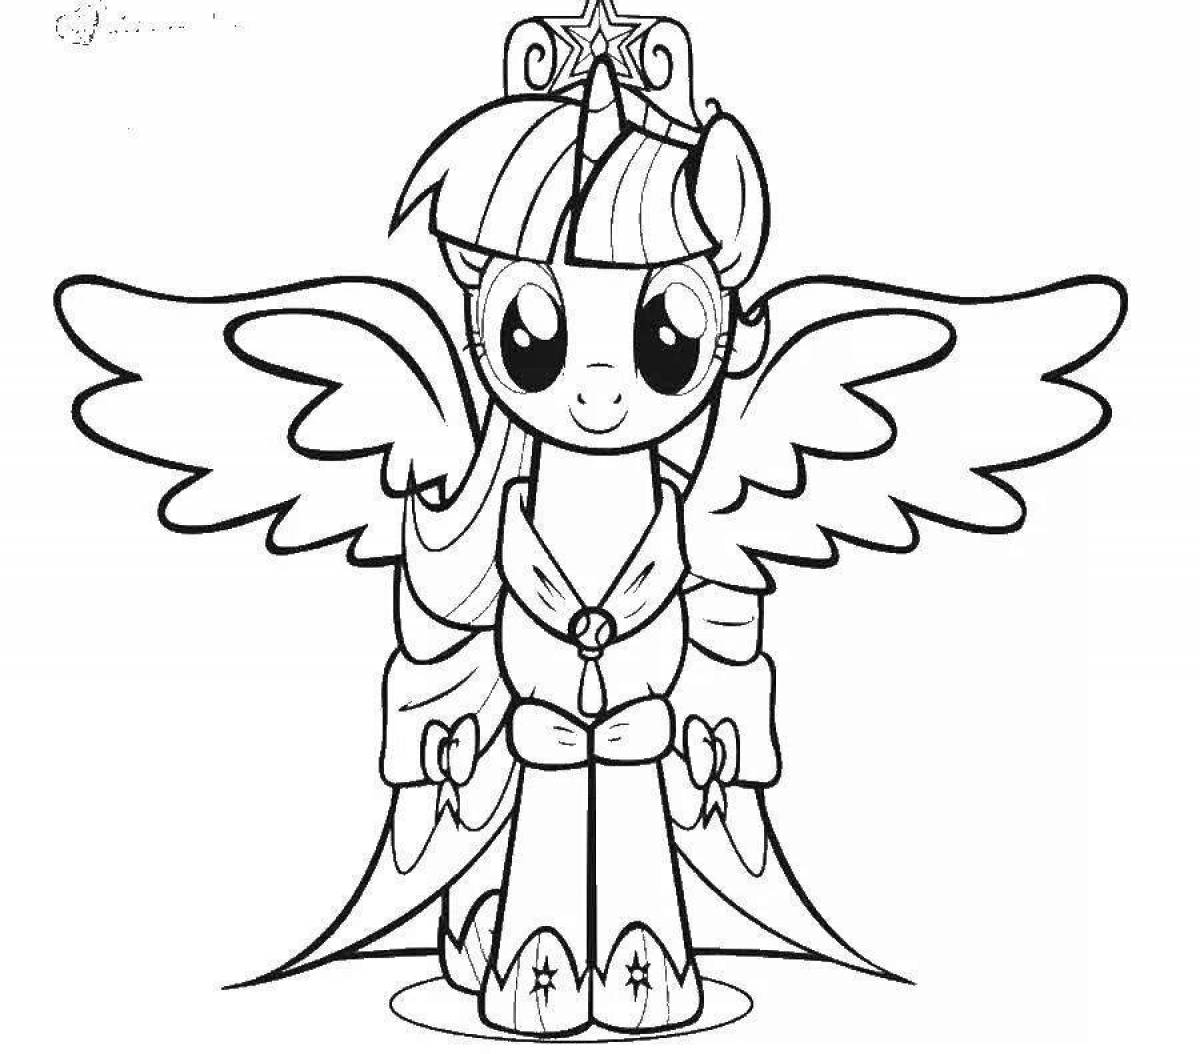 Playful pony coloring with wings